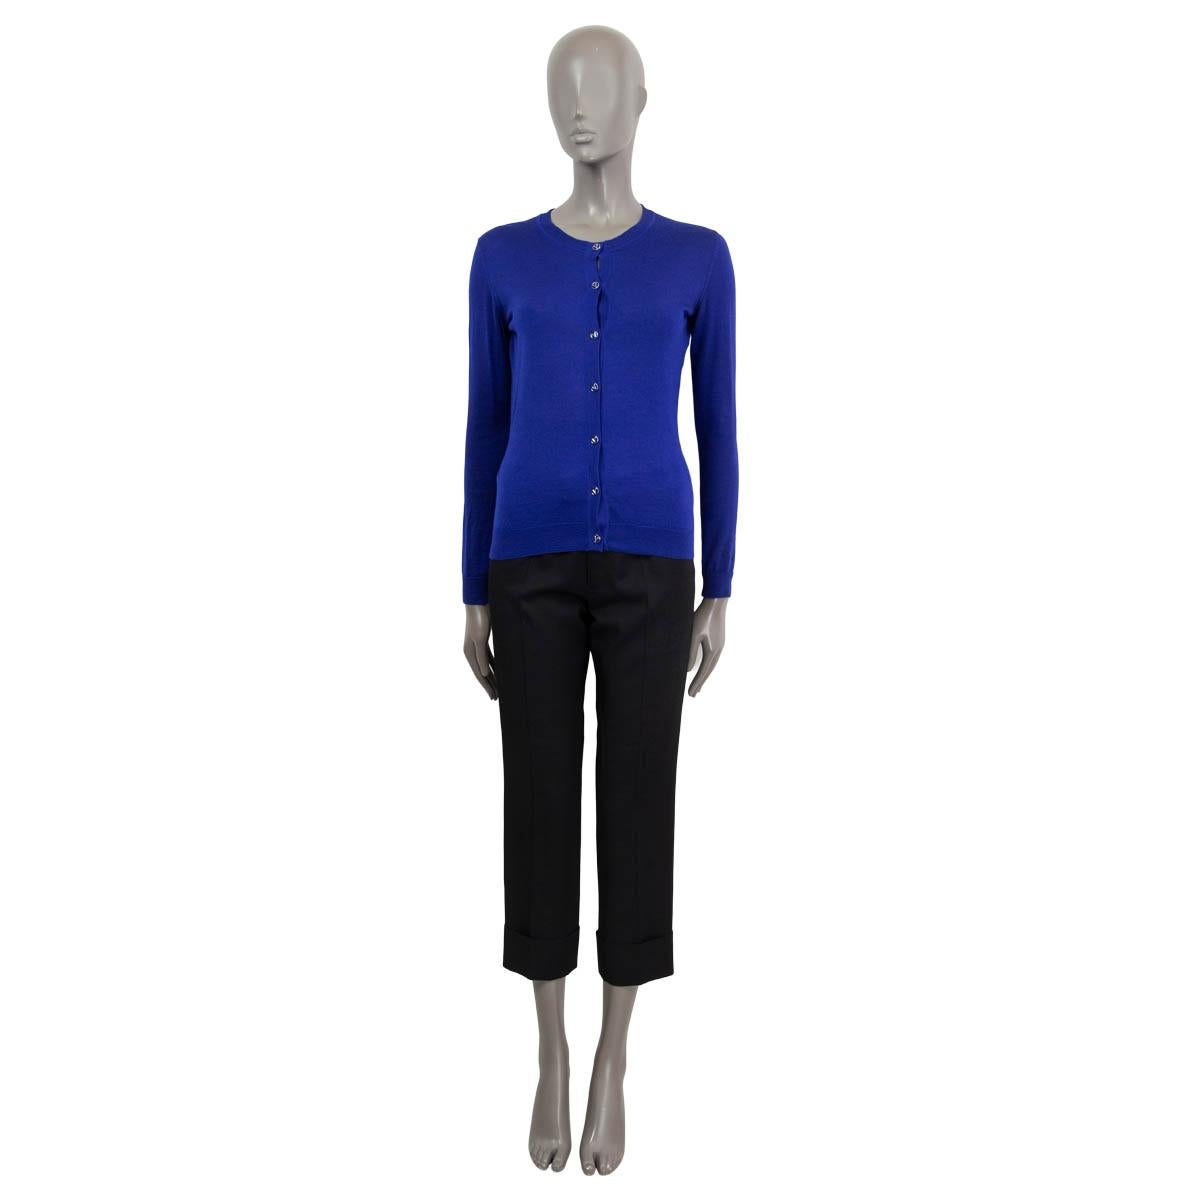 100% authentic Versace round-neck fine-knit cardigan in blue cashmere (70%) and silk (30%). Features silver and blue Versace buttons. Has been worn and is in excellent condition.

Measurements
Tag Size	40
Size	S
Shoulder Width	40cm (15.6in)
Bust